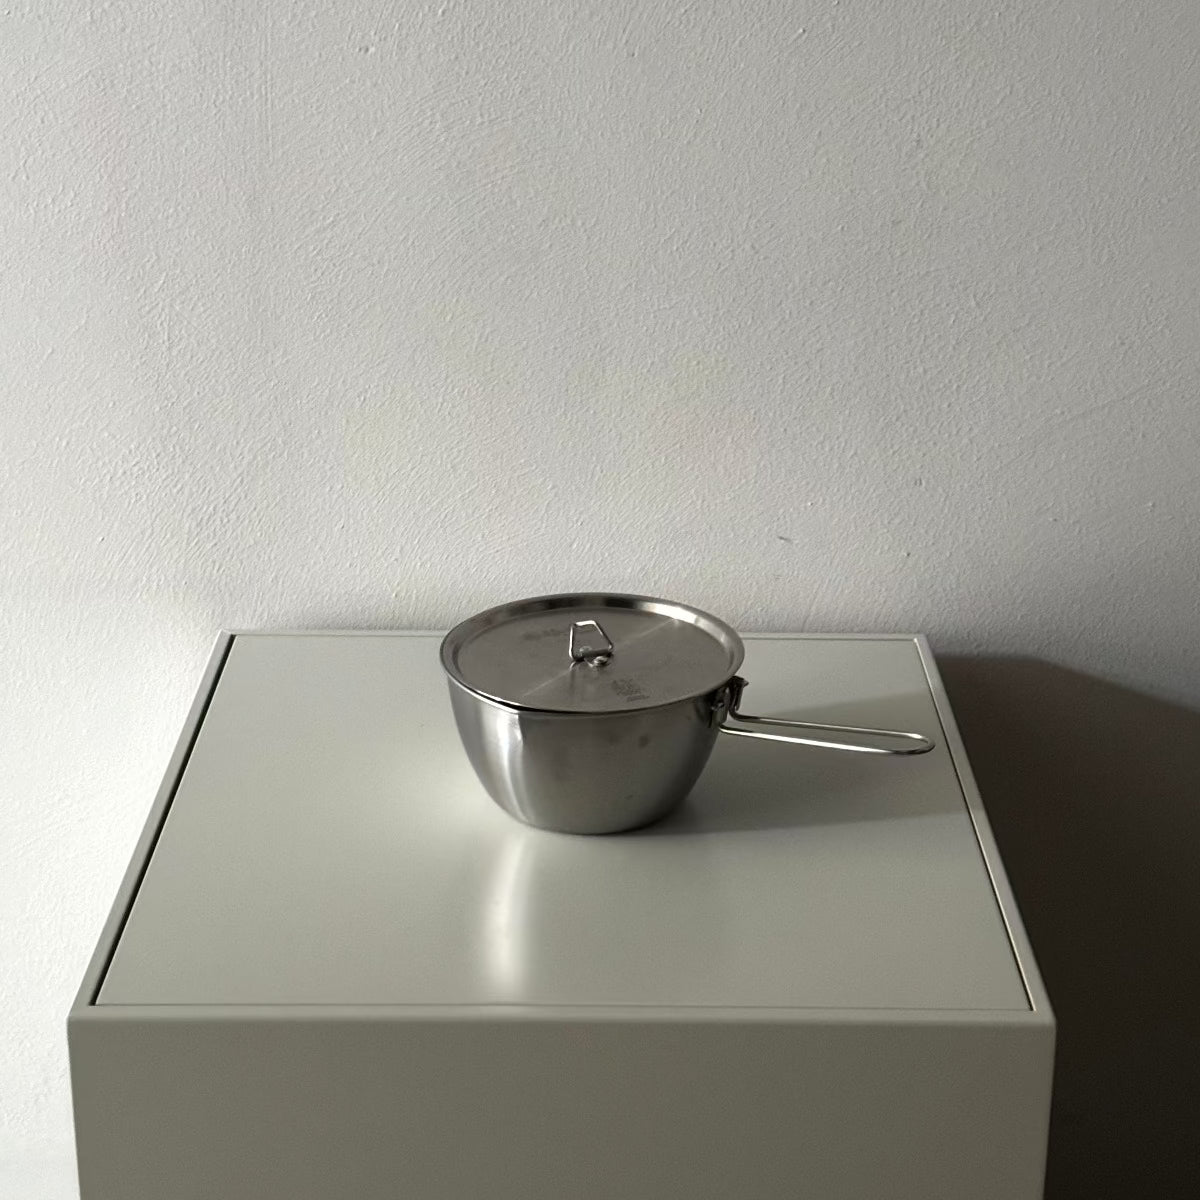 Stainless Steel Cooking Bowl